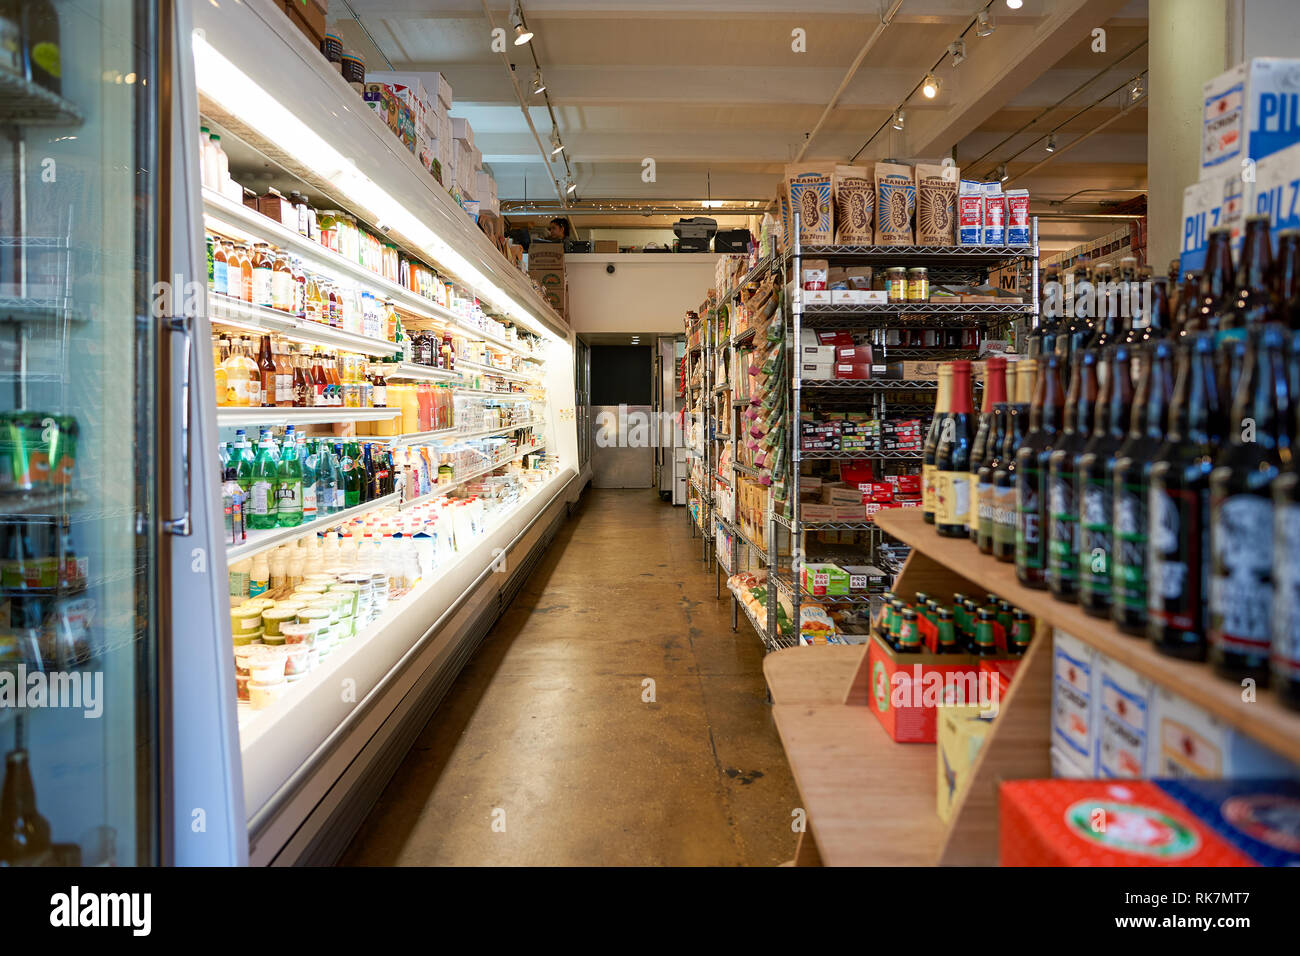 NEW YORK - CIRCA MARCH, 2016: inside food store in Brooklyn. Brooklyn is the most populous of New York City's five boroughs. Stock Photo